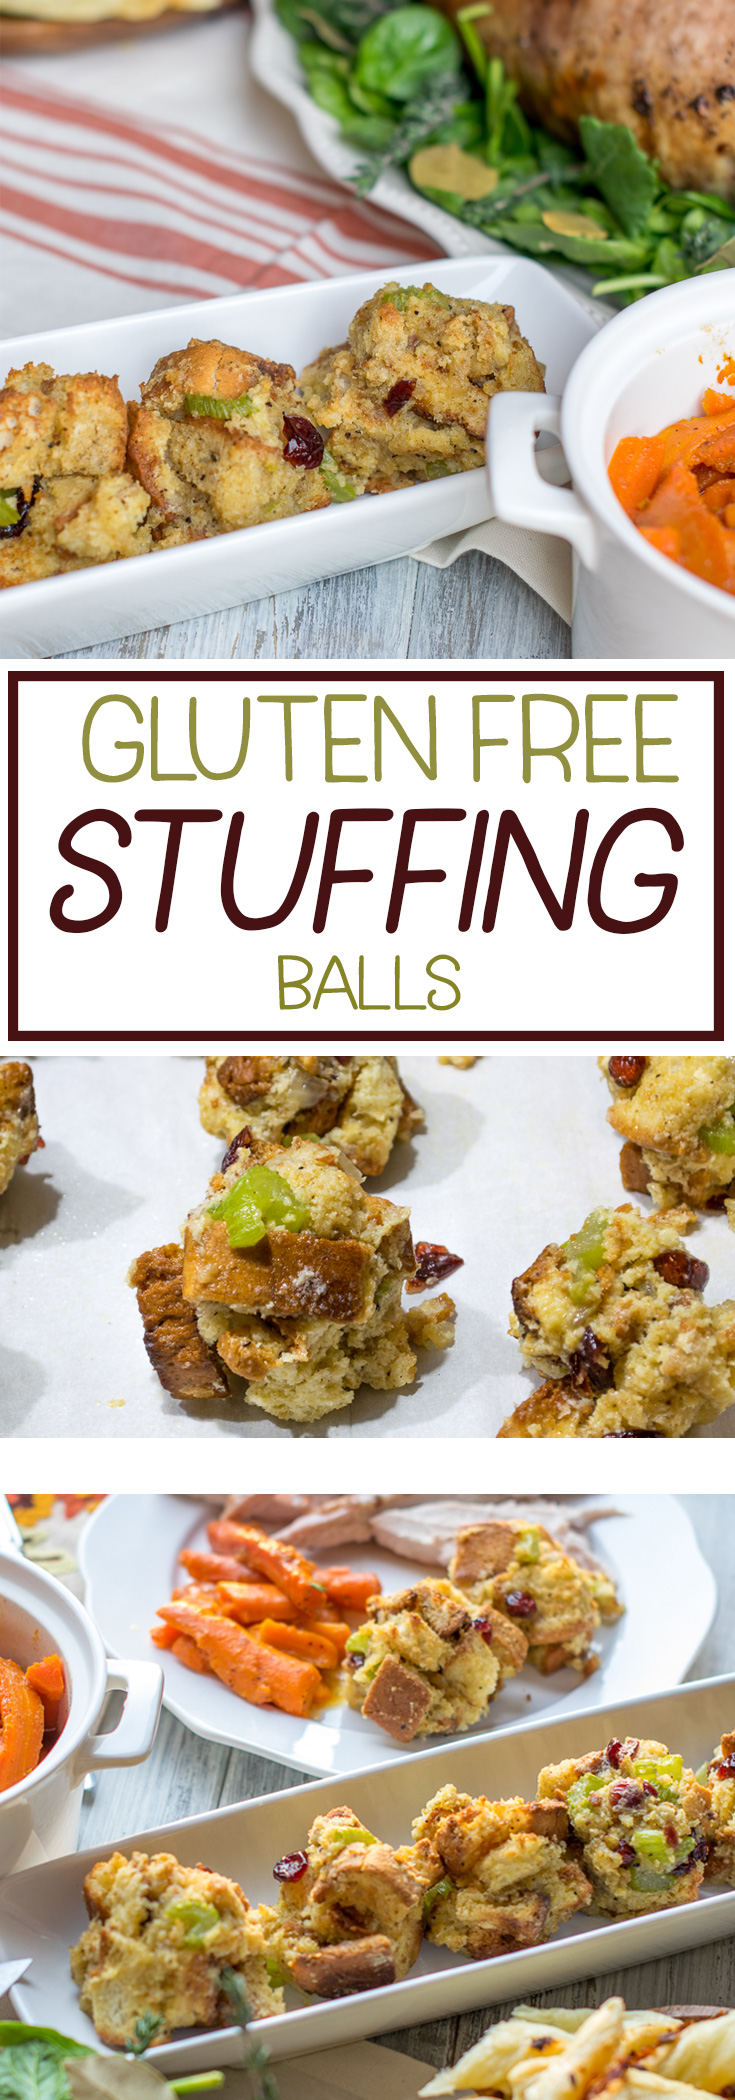 Celebrating a gluten free Thanksgiving? Enjoy gluten free stuffing balls! A traditional recipe with gluten free bread substituted, it's a family favorite! #glutenfree #glutenfreeThanksgiving #Thanksgivingrecipes #stuffing via @mrsmajorhoff